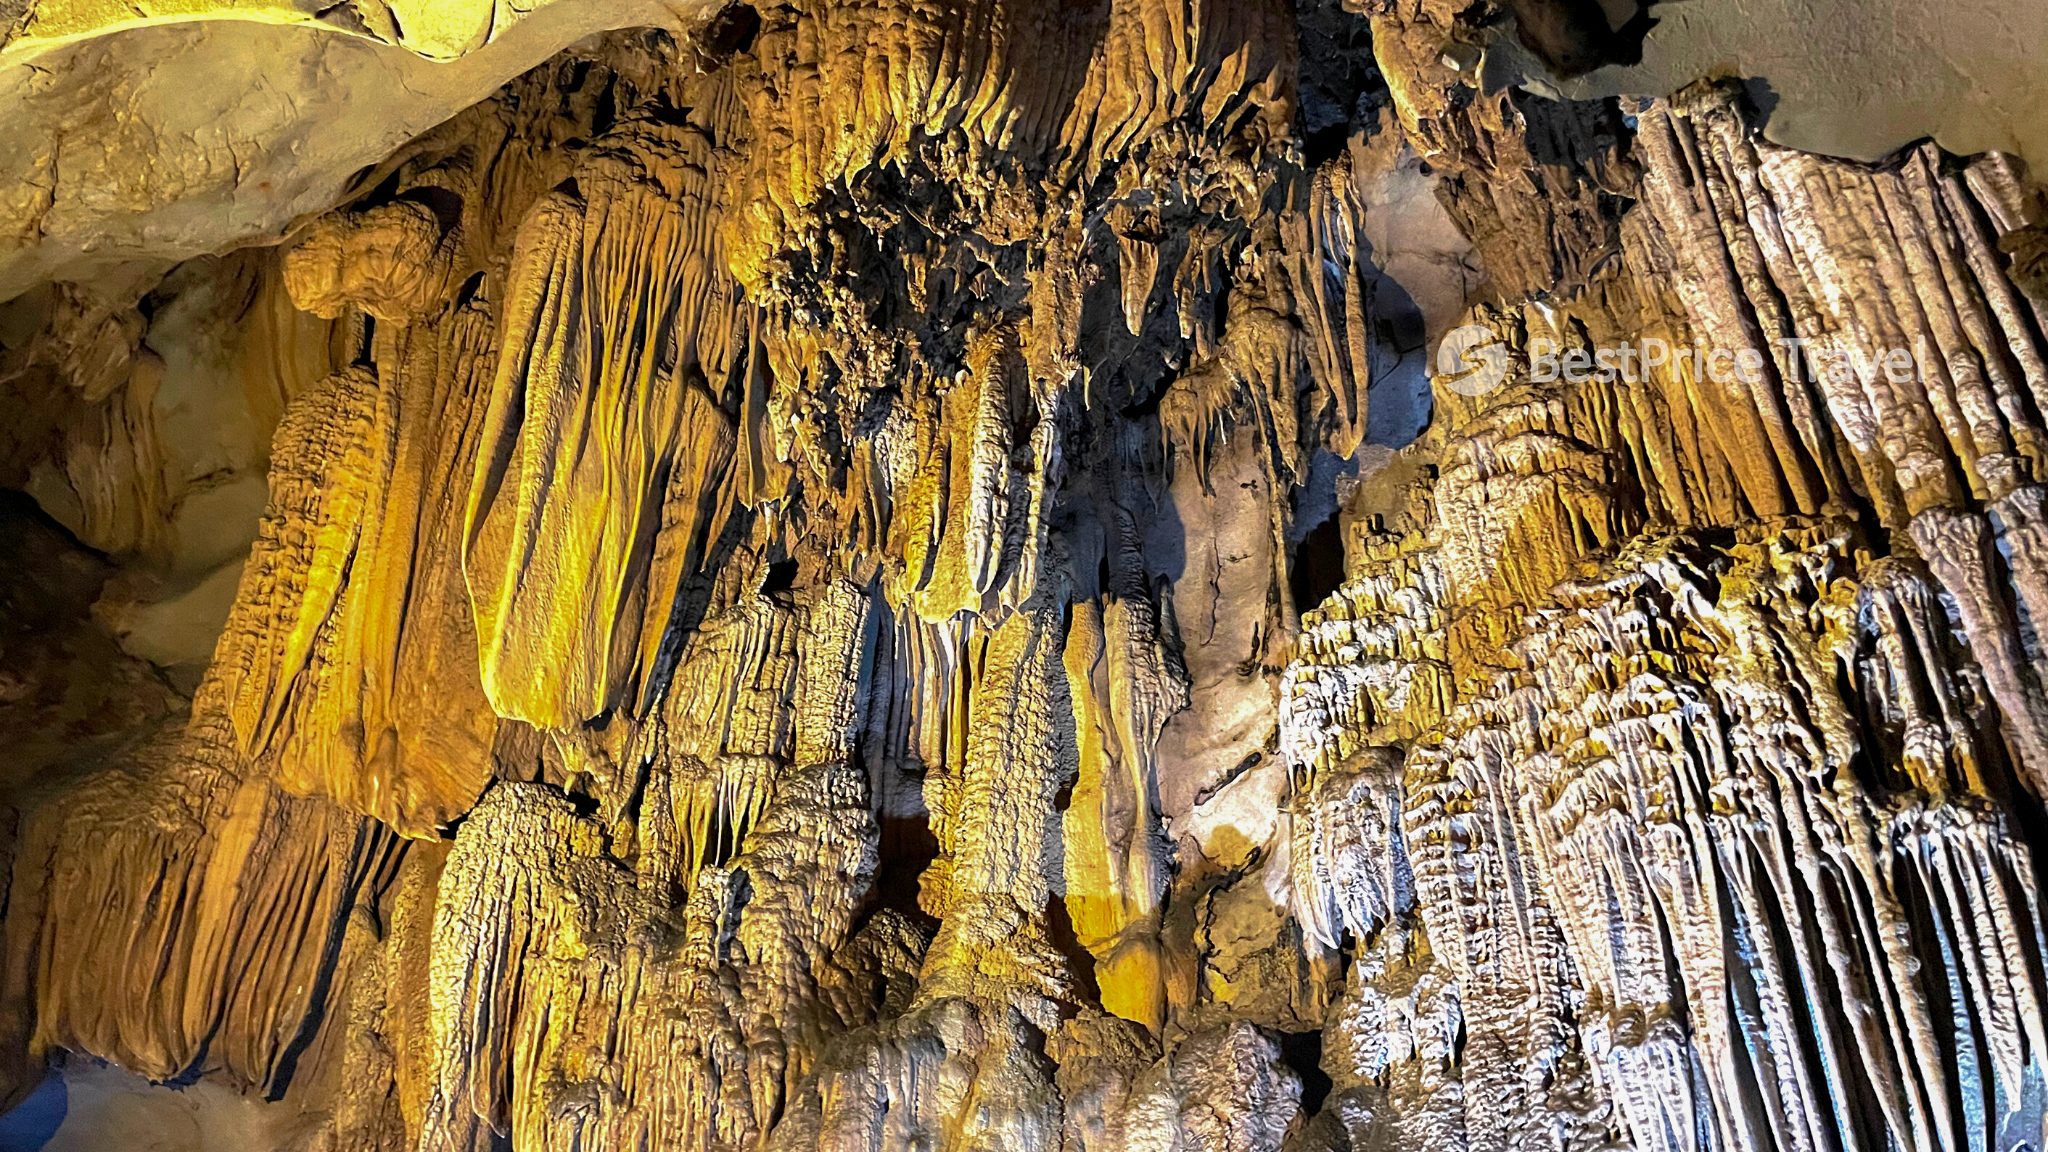 Inside the Trung Trang Cave